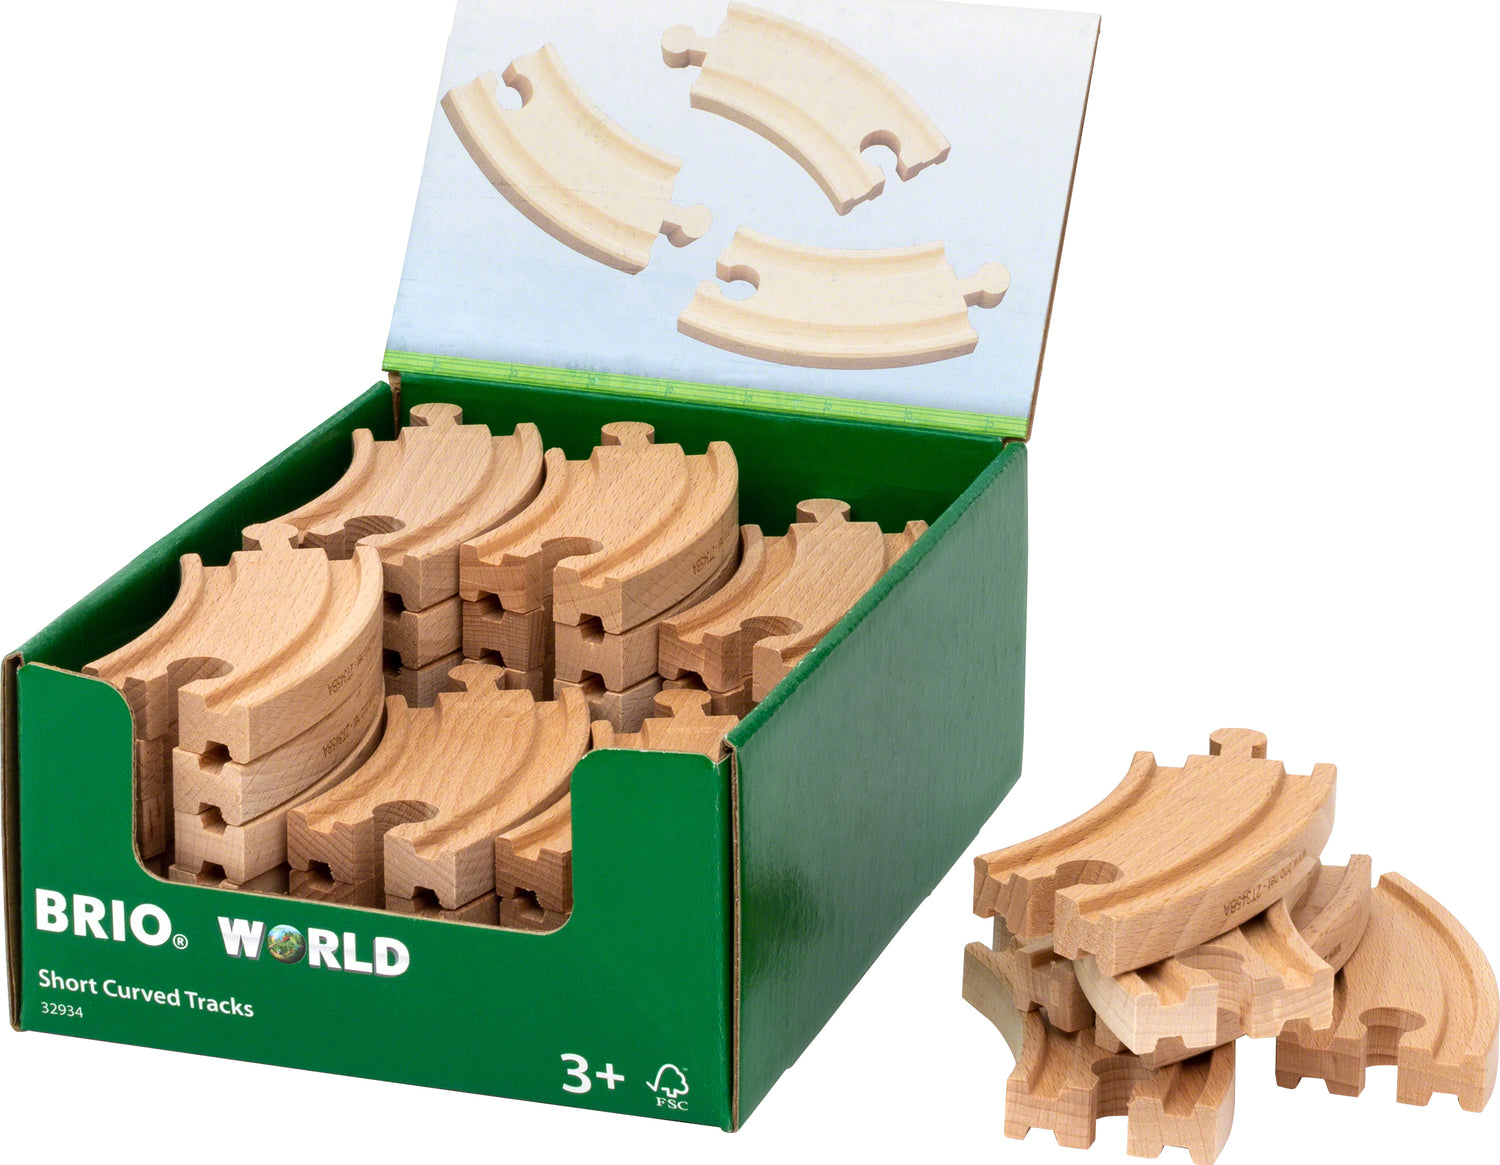 BRIO Short Curved Tracks (sold individually)